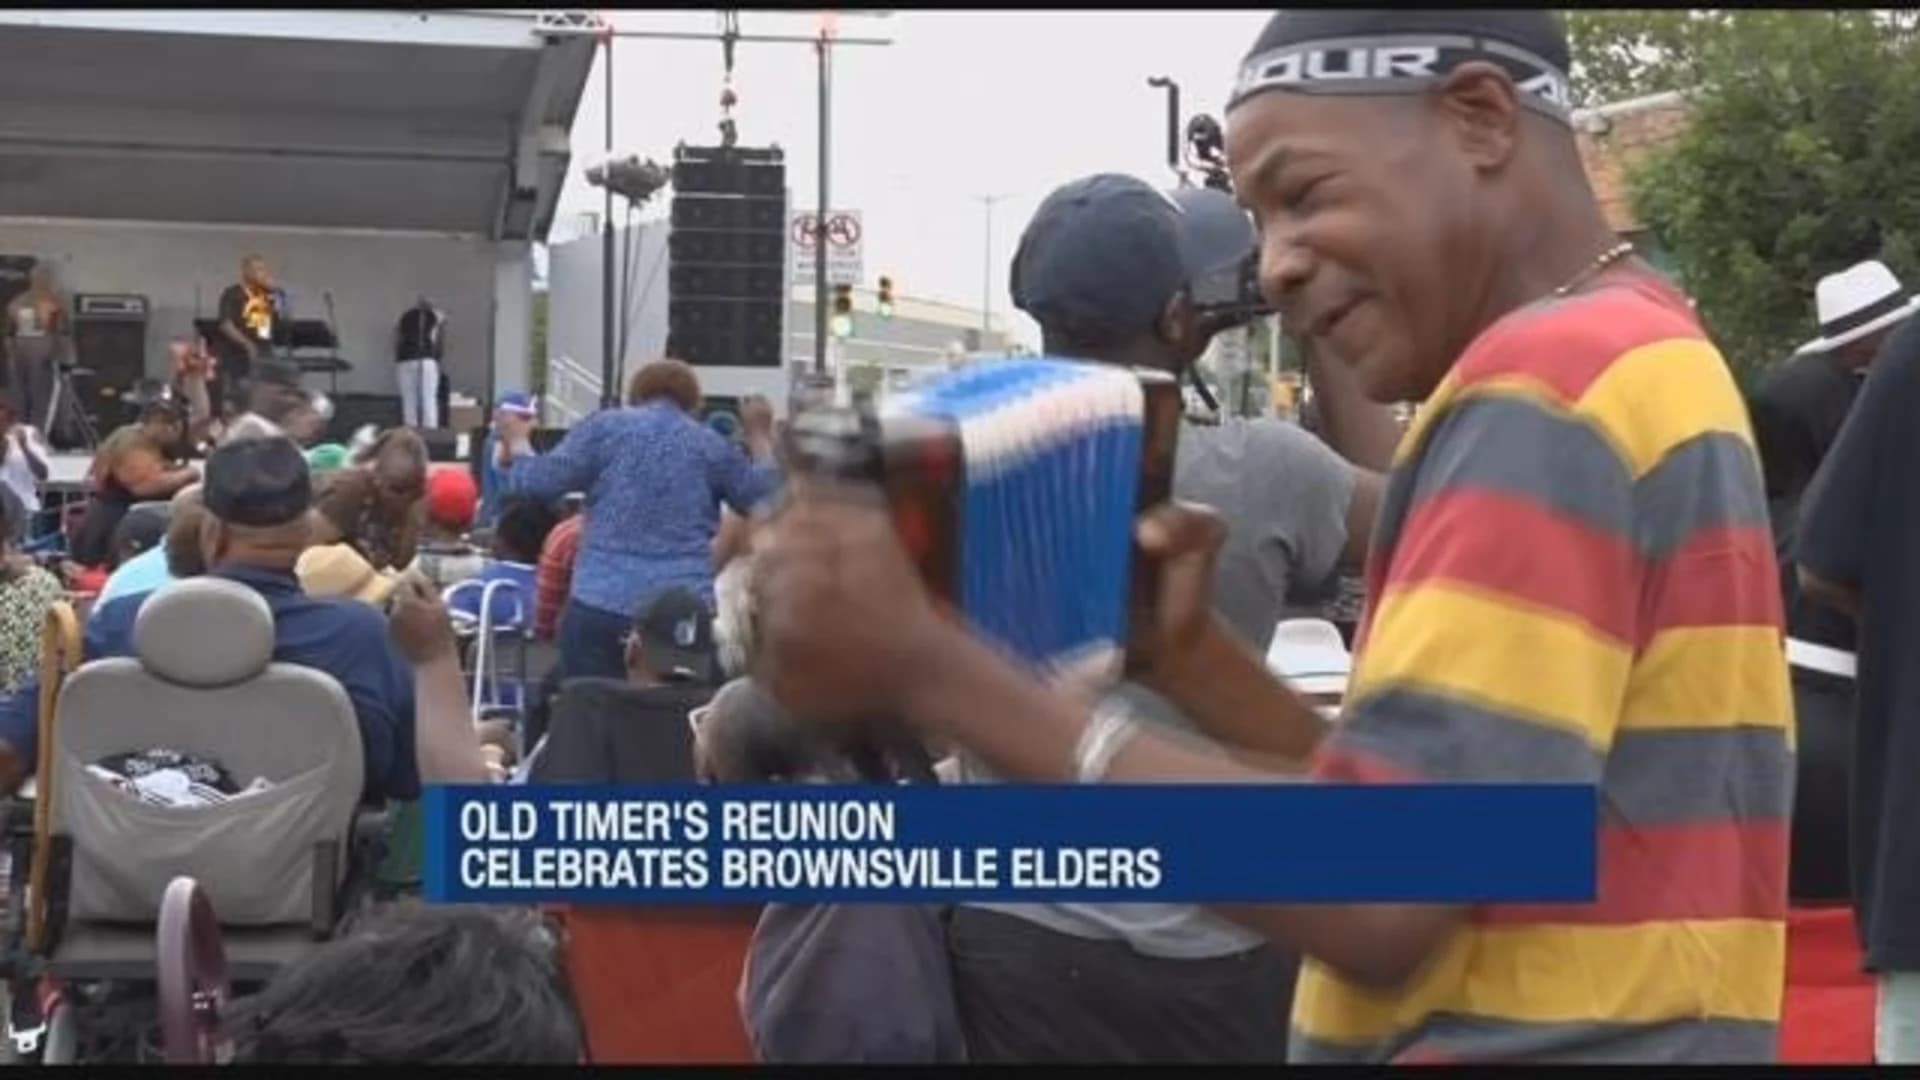 Residents reunite at annual Brownsville Old Timer’s Reunion Party